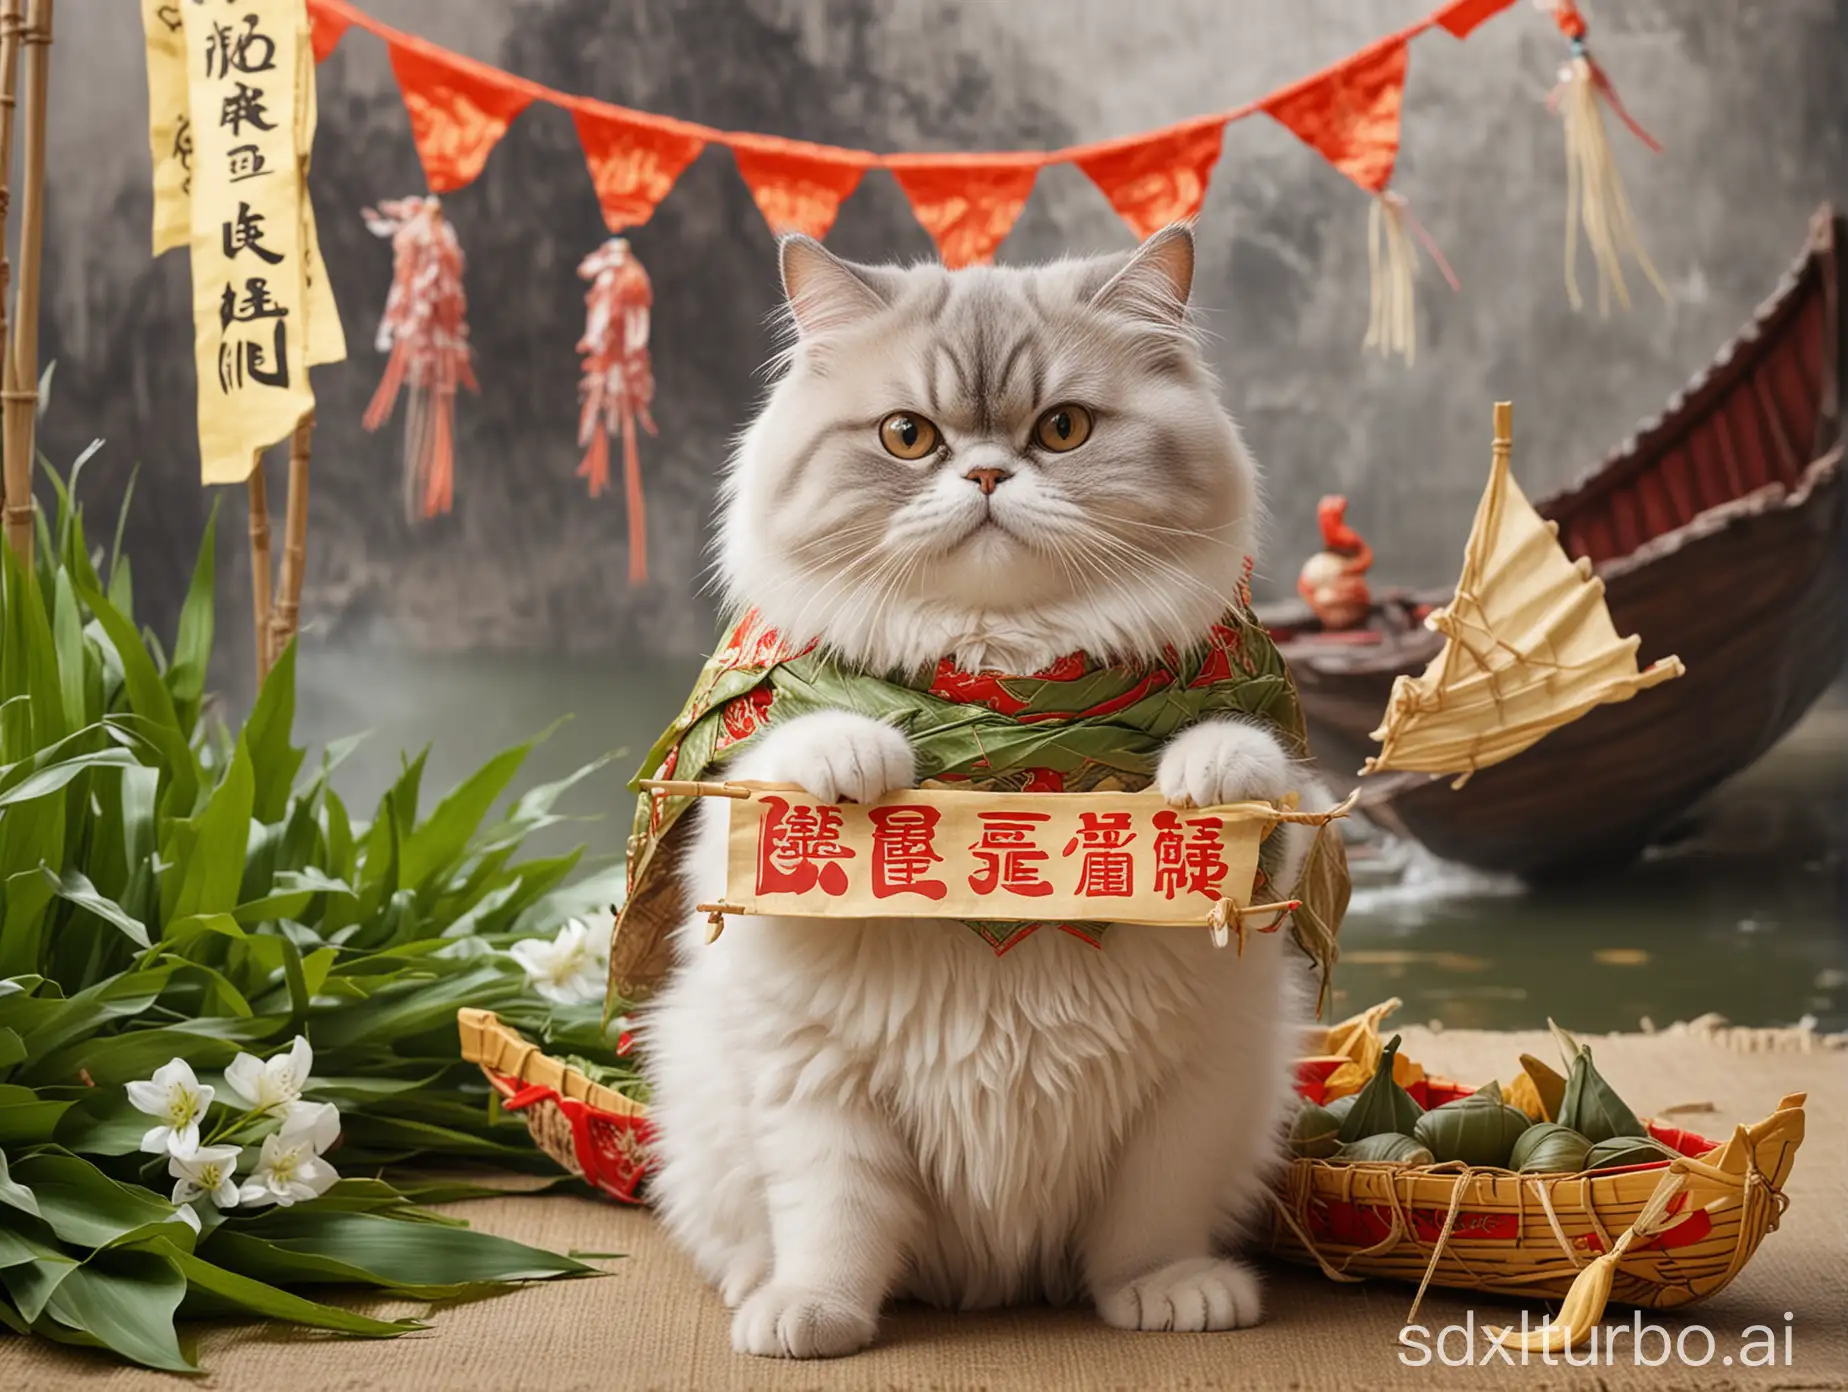 Festive-Fluffy-Cat-Holding-Happy-Dragon-Boat-Festival-Banner-Surrounded-by-Zongzi-and-Small-Boats